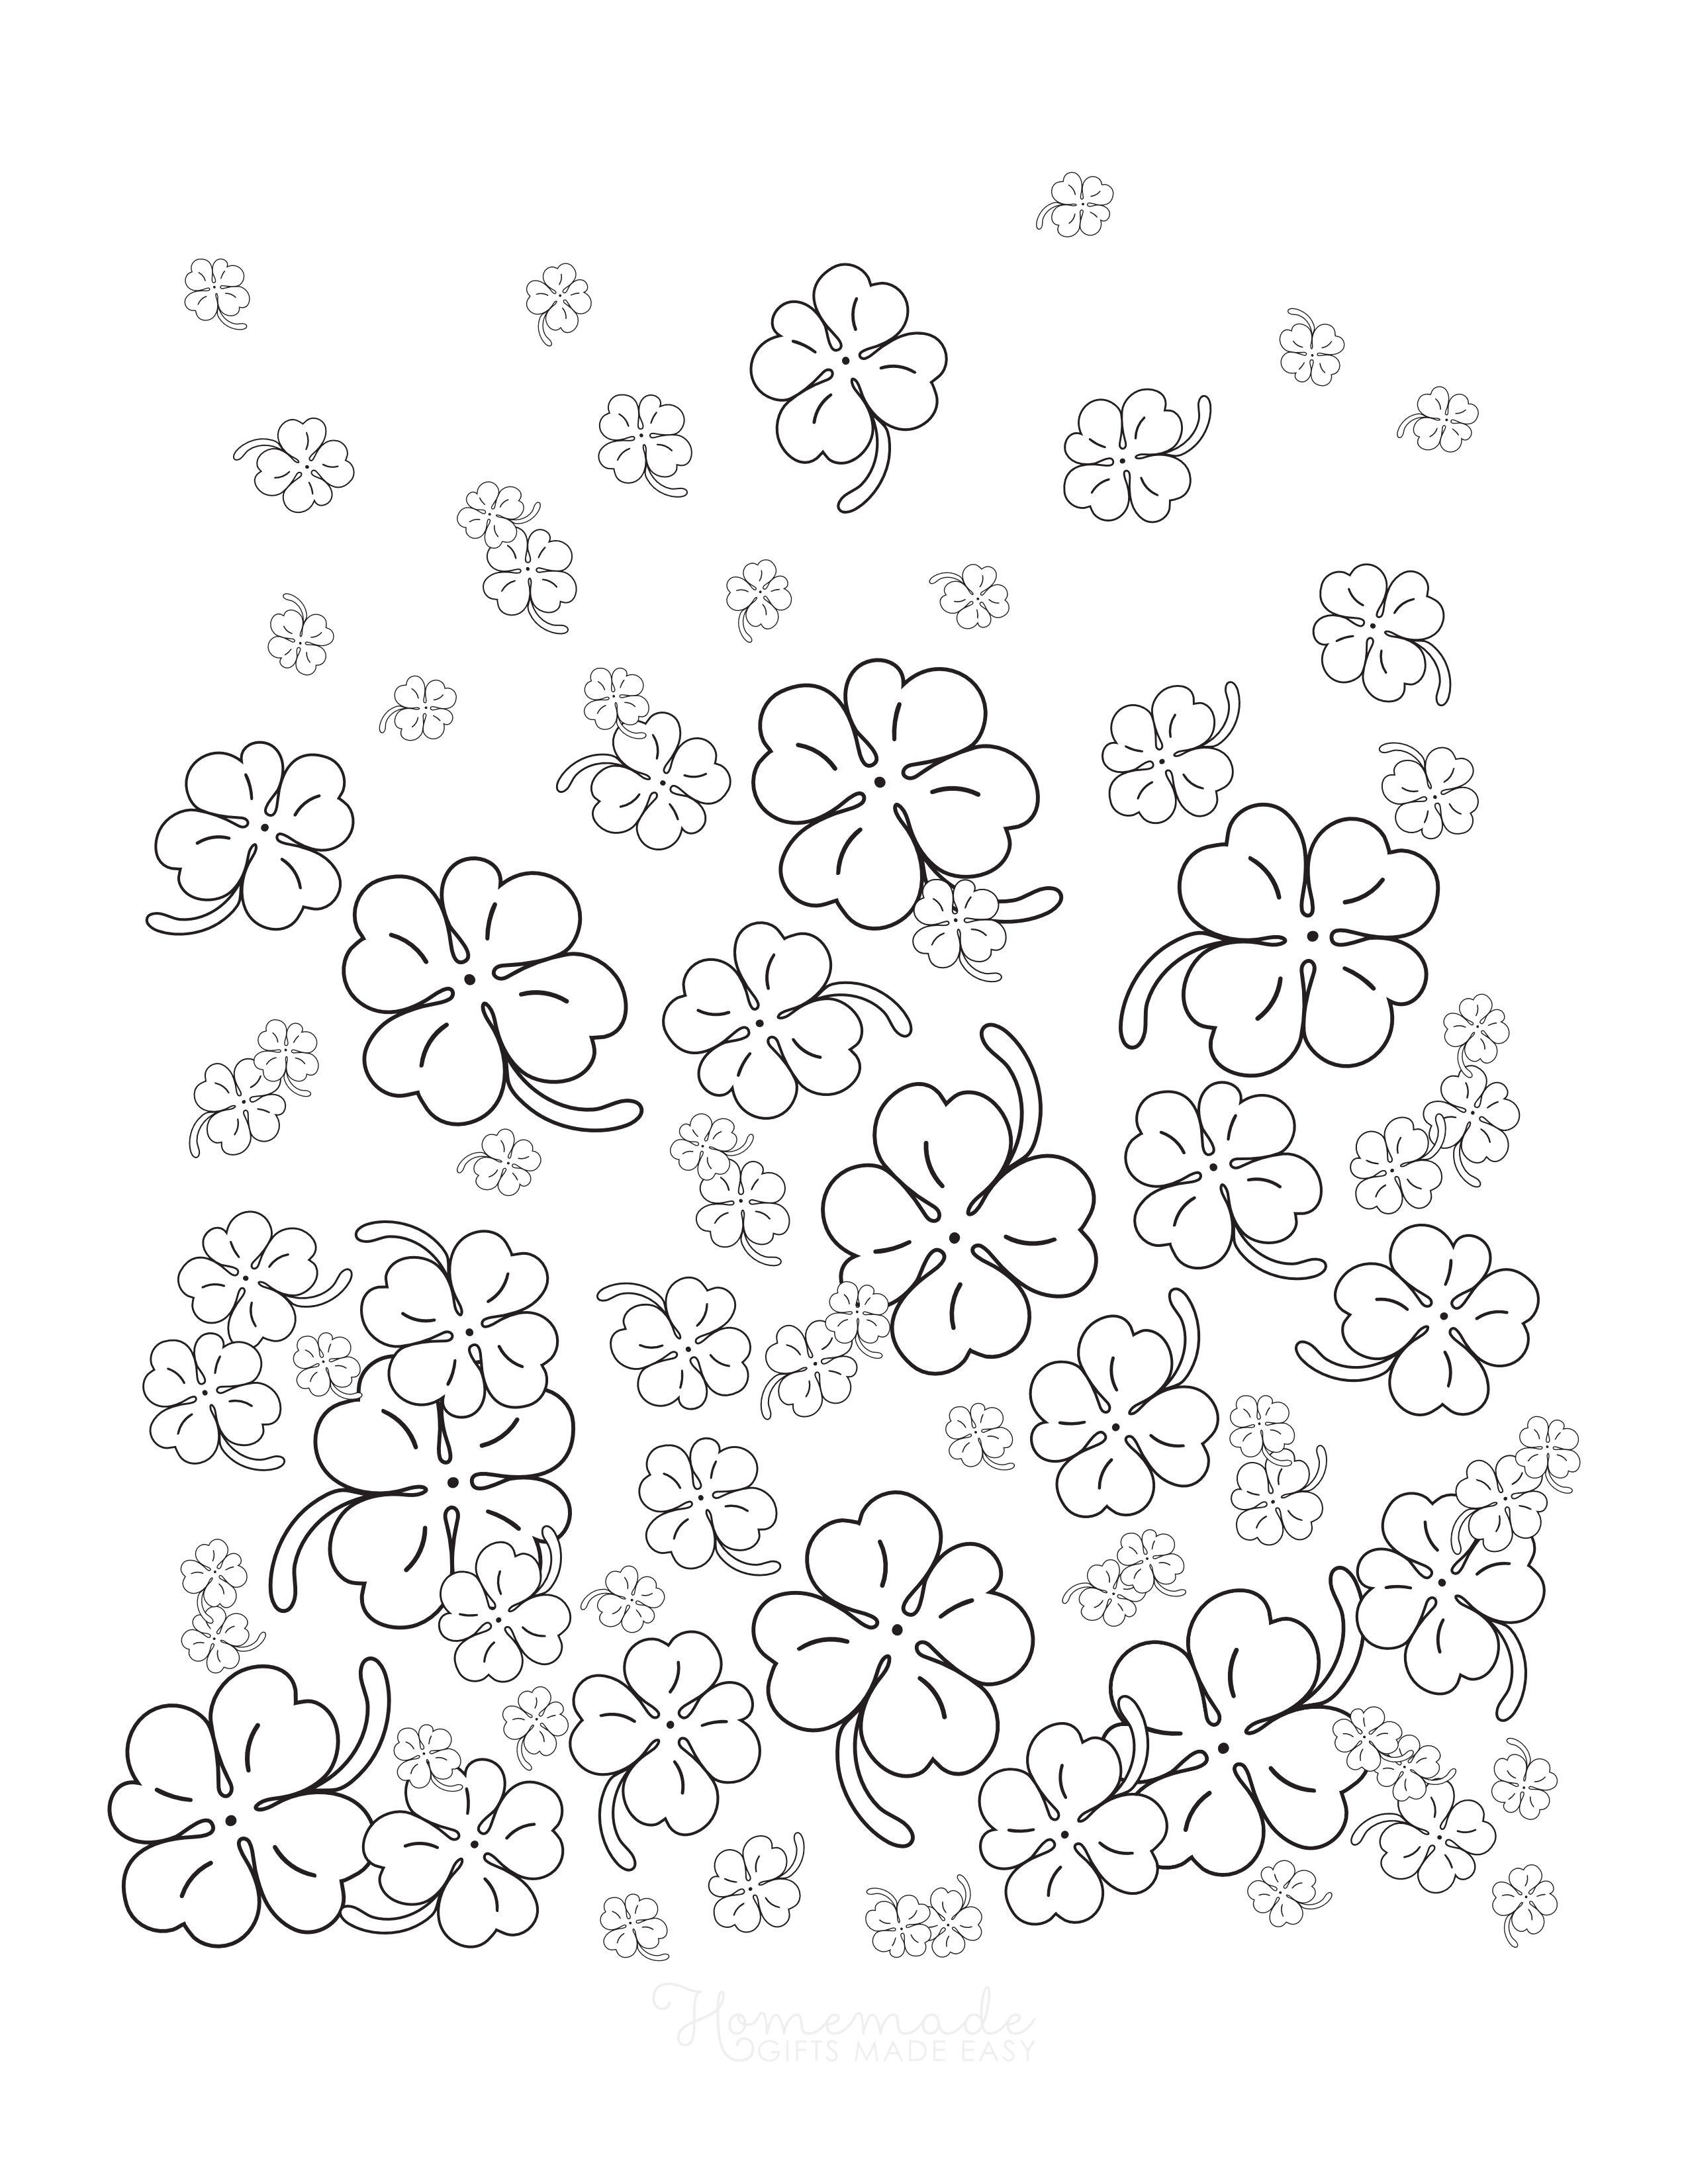 Four leaves clover shamrocks Coloring Page